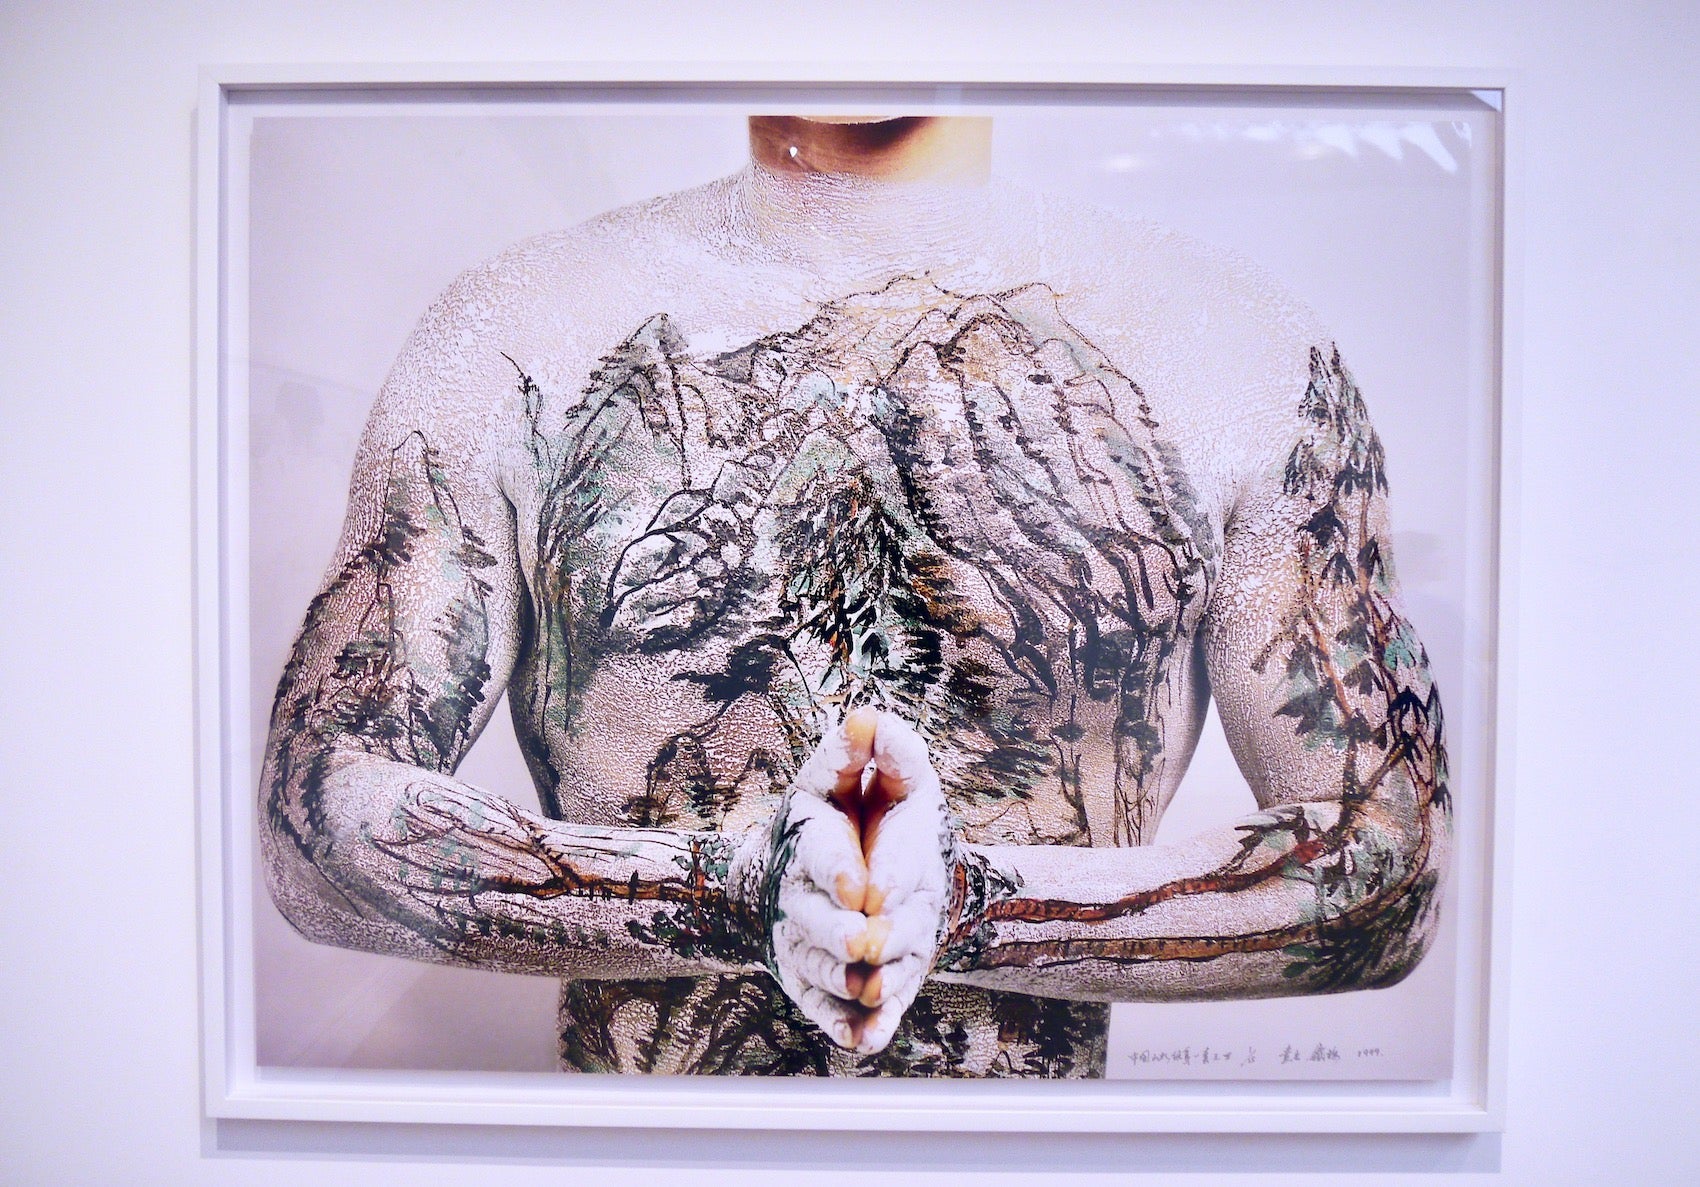 Highlight photograph in Huang Yan's Tattoo Utopia show in Hong Kong at Leo Gallery